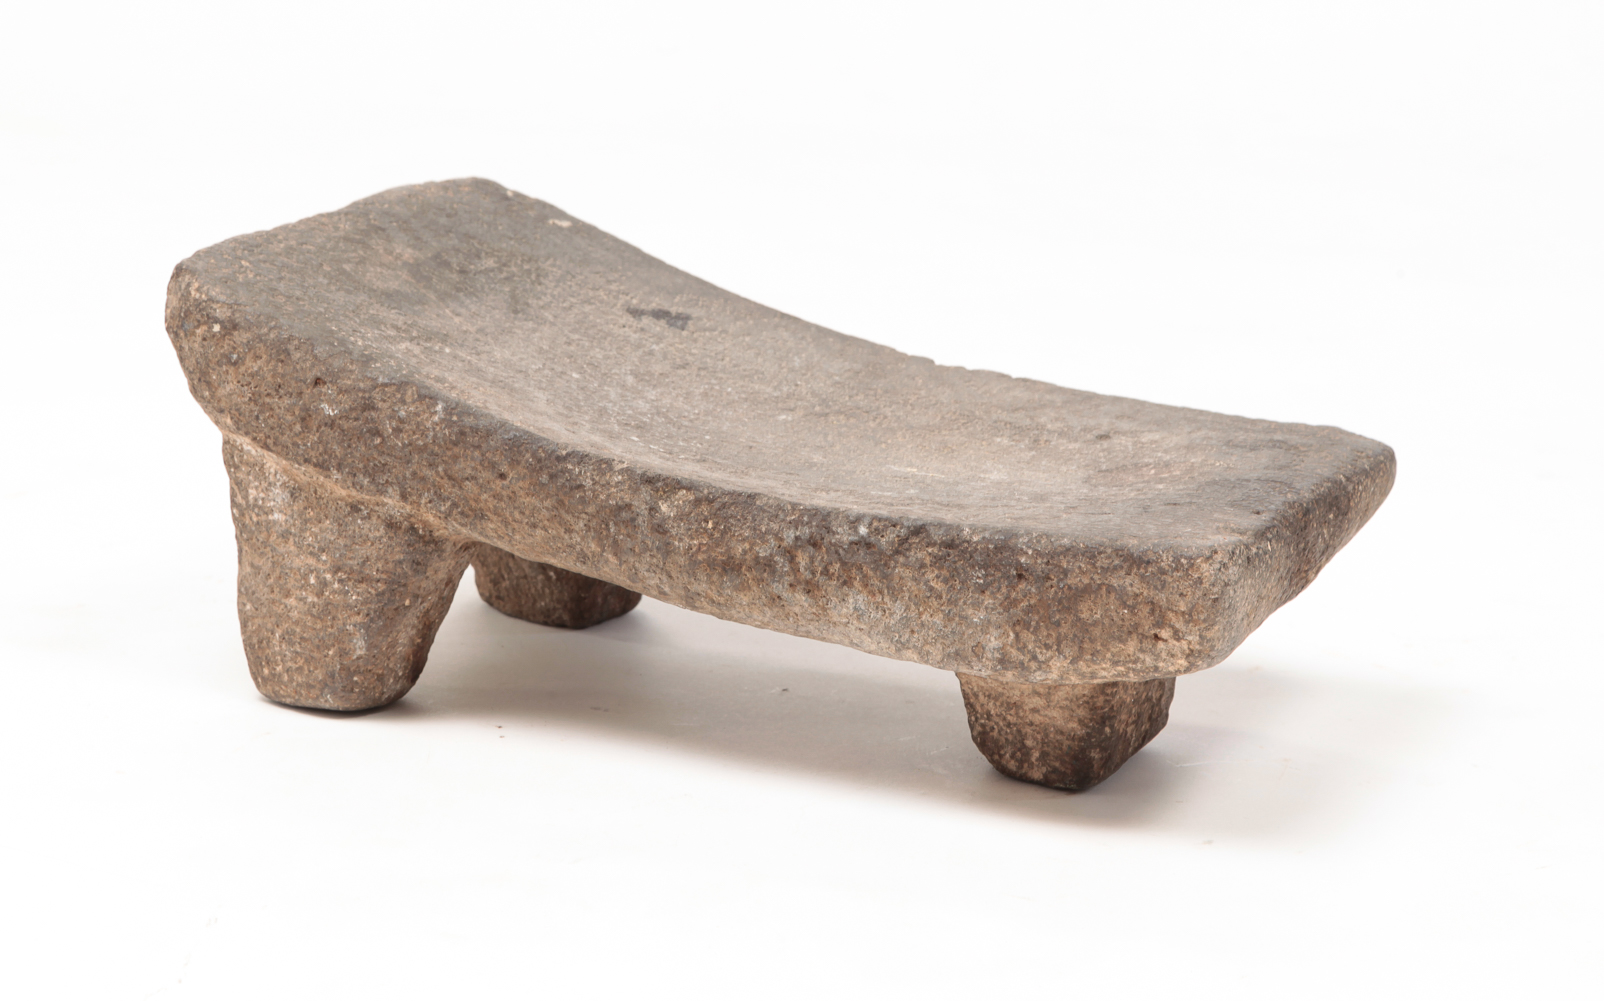 STONE METATE. South or Central